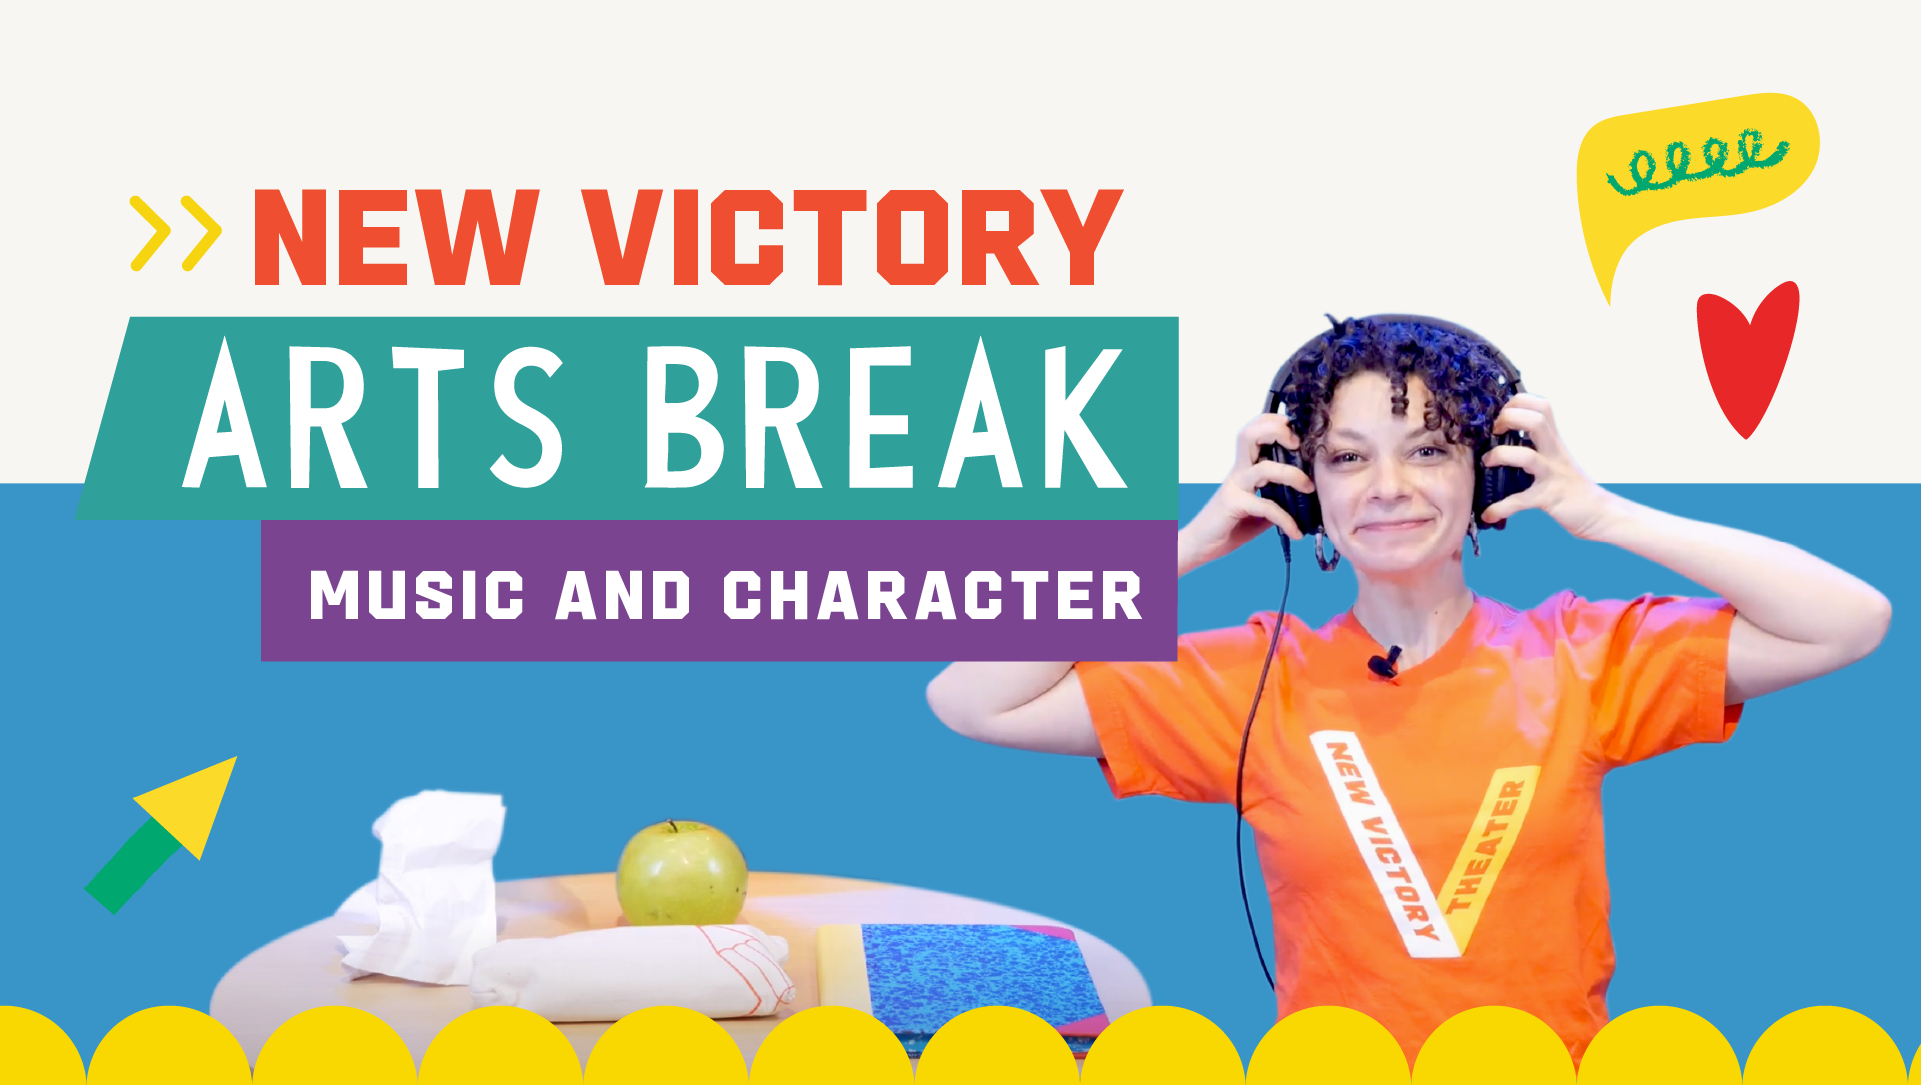 New Victory Arts Break: Music and Character